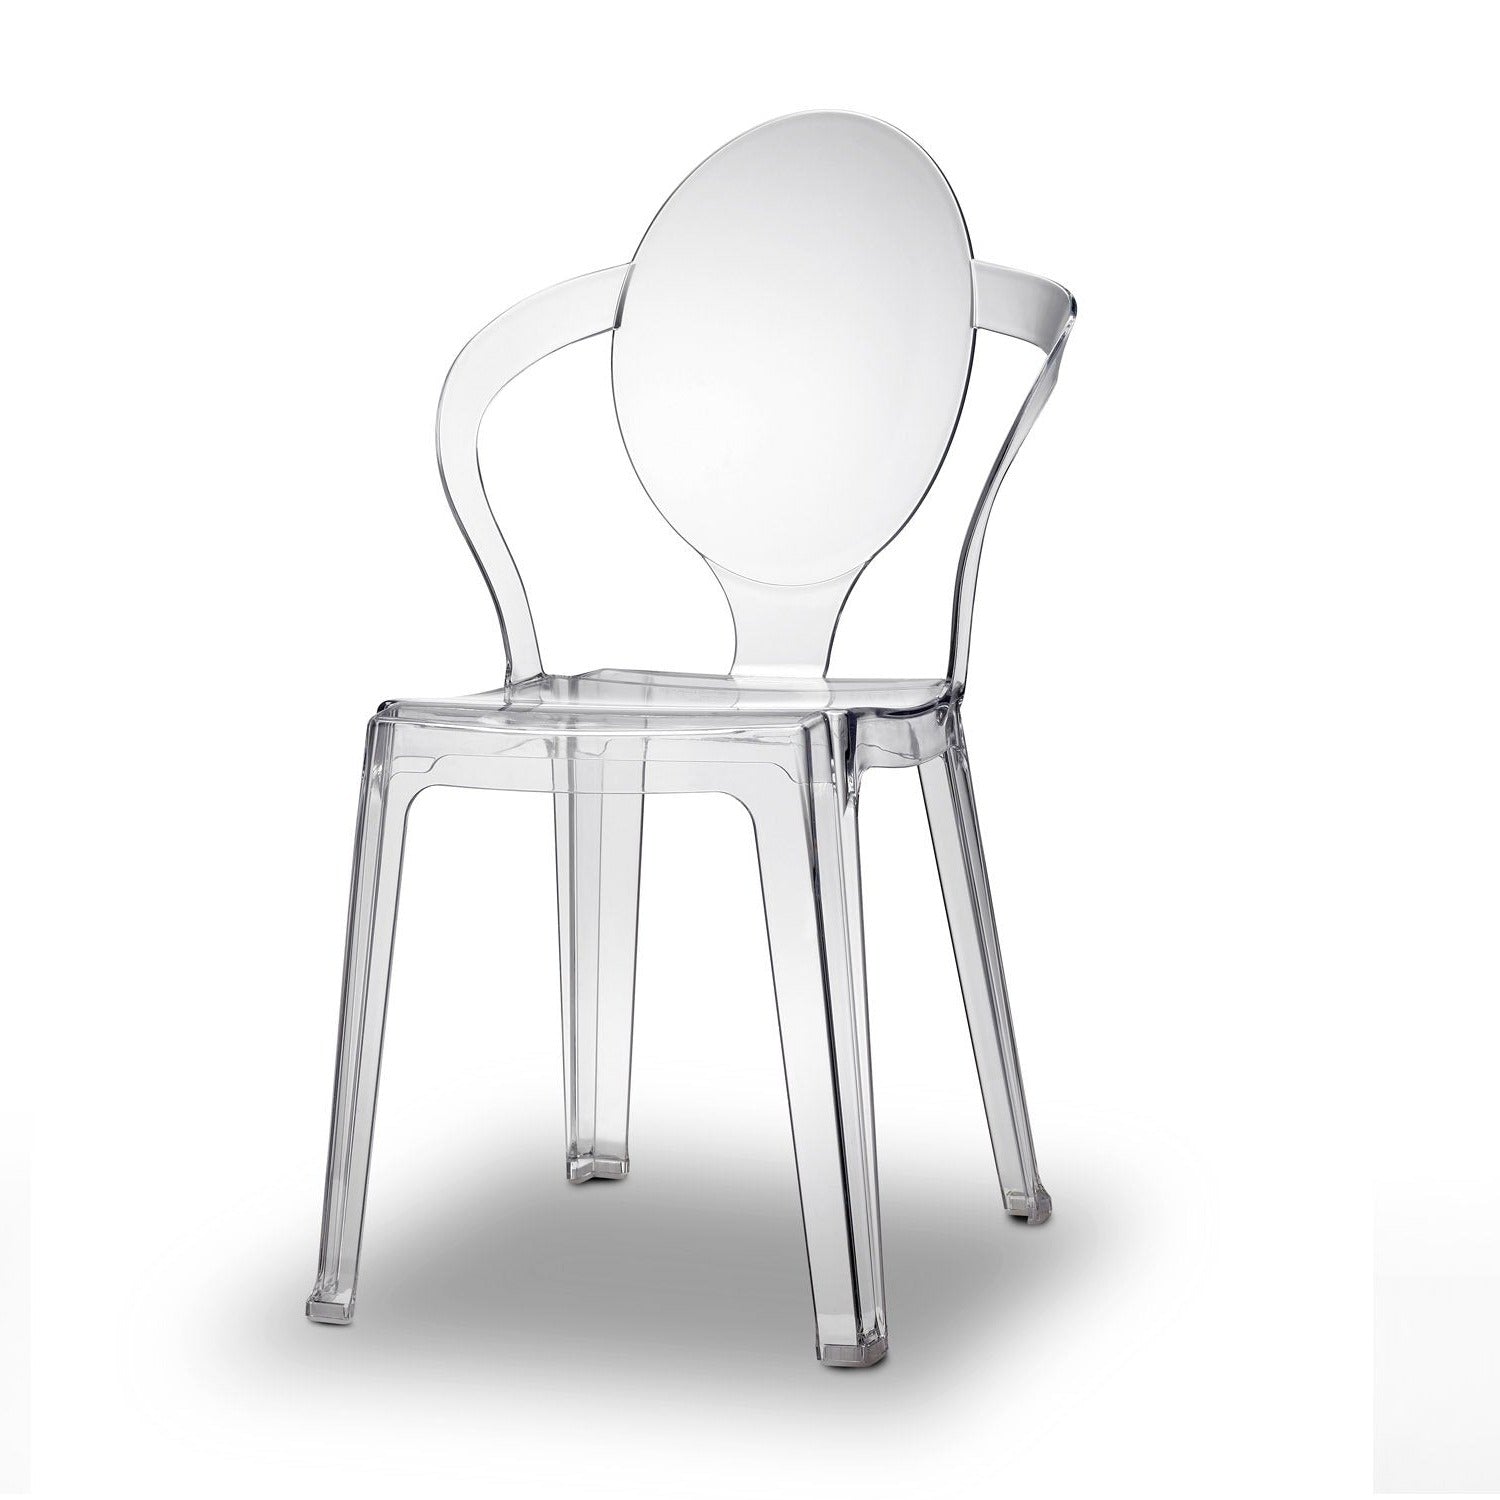 King translucent stacking dining chair by Scab Design